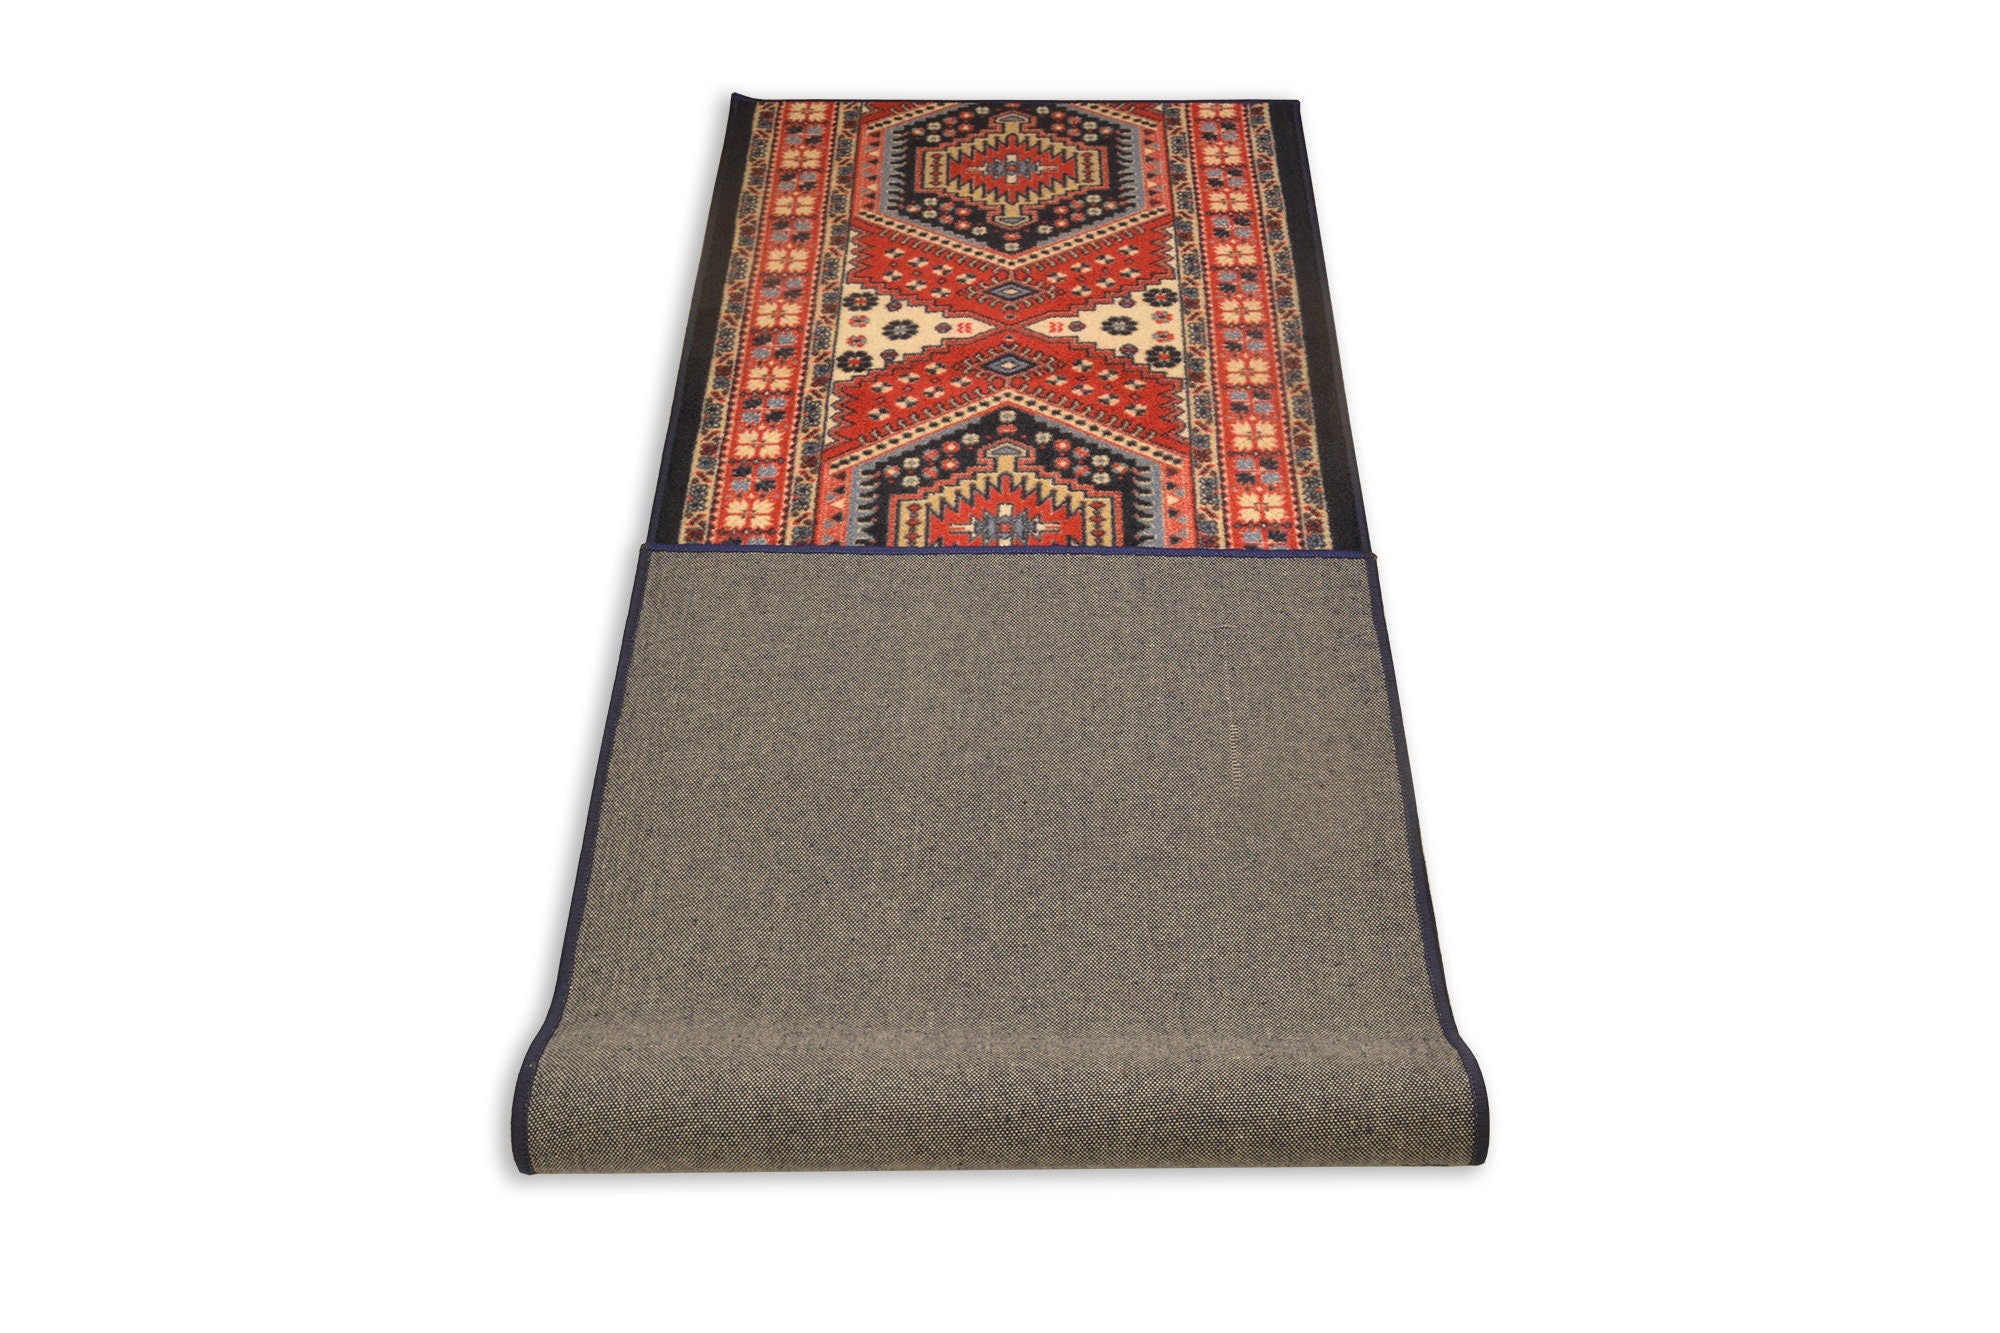 Custom Size Runner Rug Antique Oriental Turkish Kilim Design Canvas Backing Pick Your Own Size By Up to 50 Ft Length, 26" or 35" Width-3